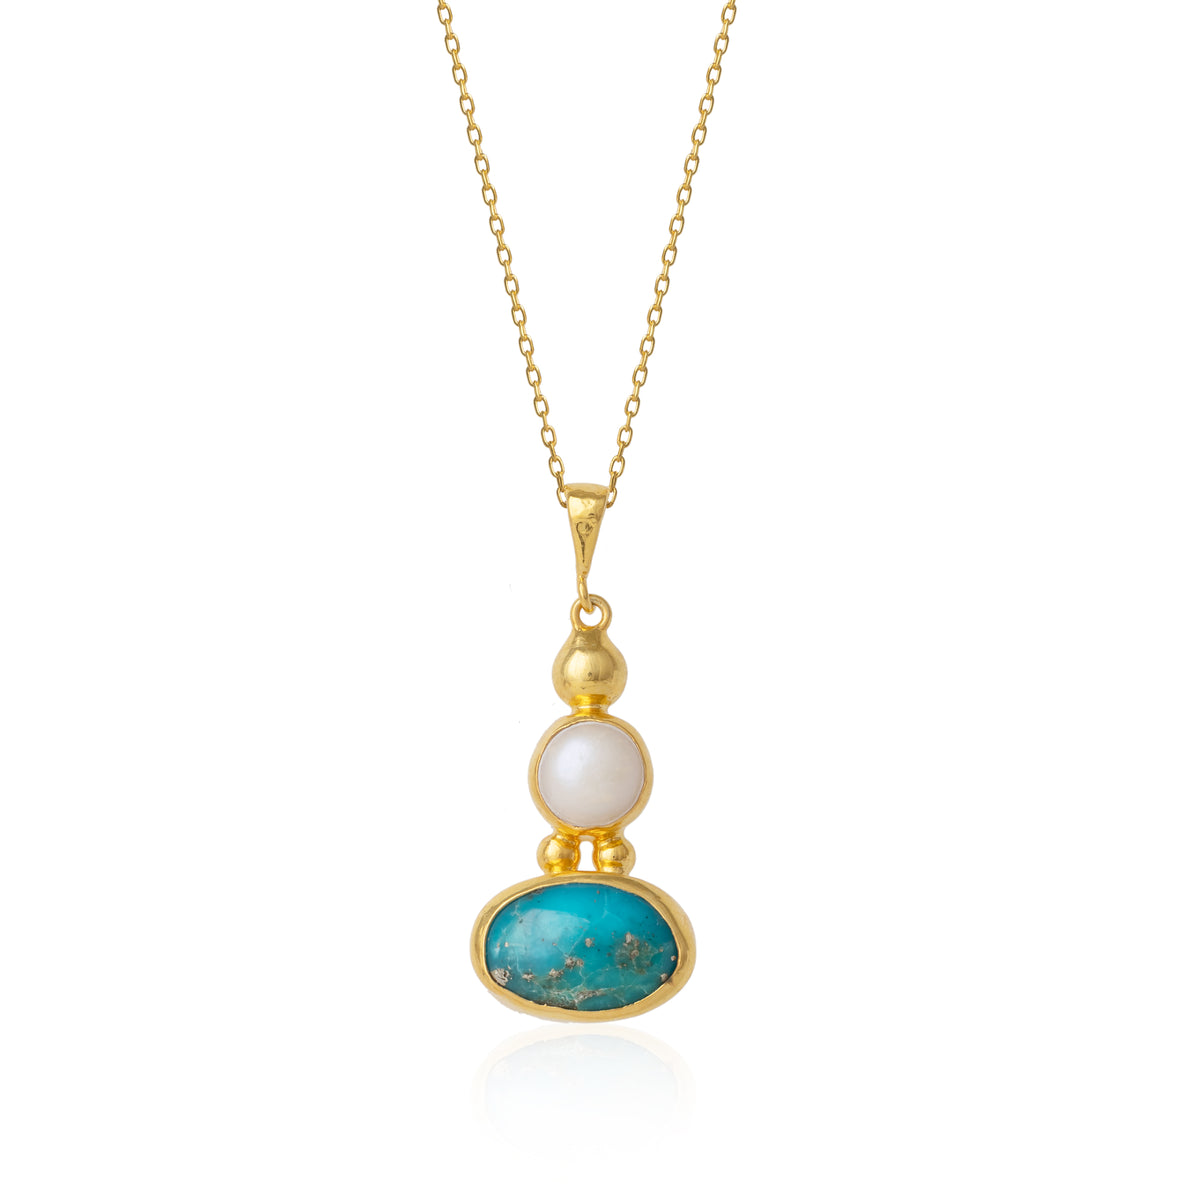 Turquoise Authentic Pendant Sterling Silver Gold Plated Necklace